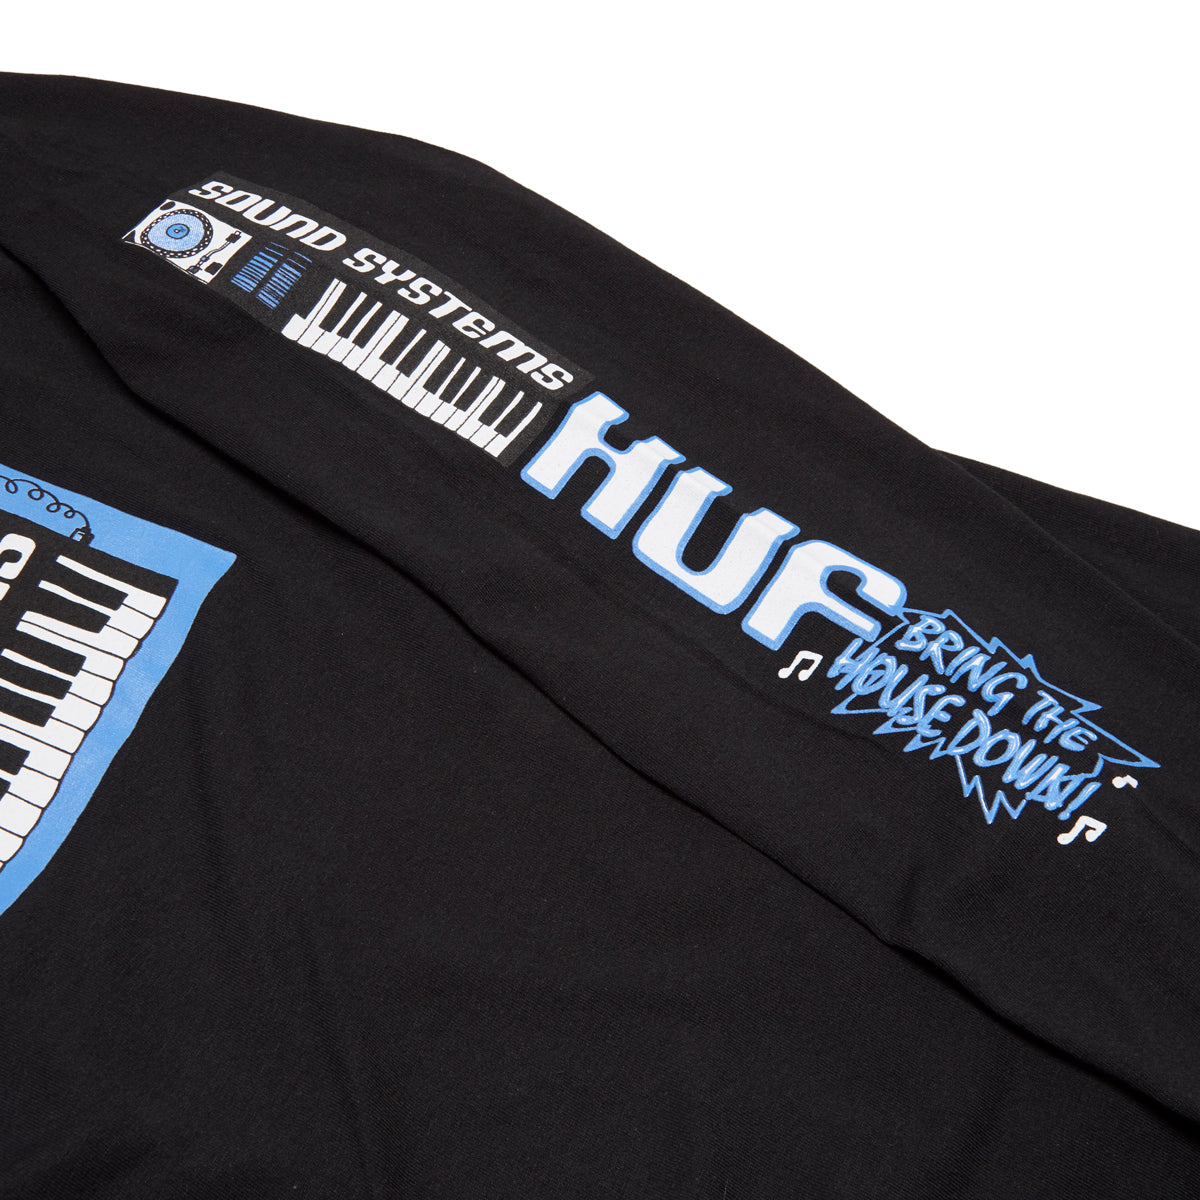 HUF Sound Systems Long Sleeve T-Shirt - Black image 3